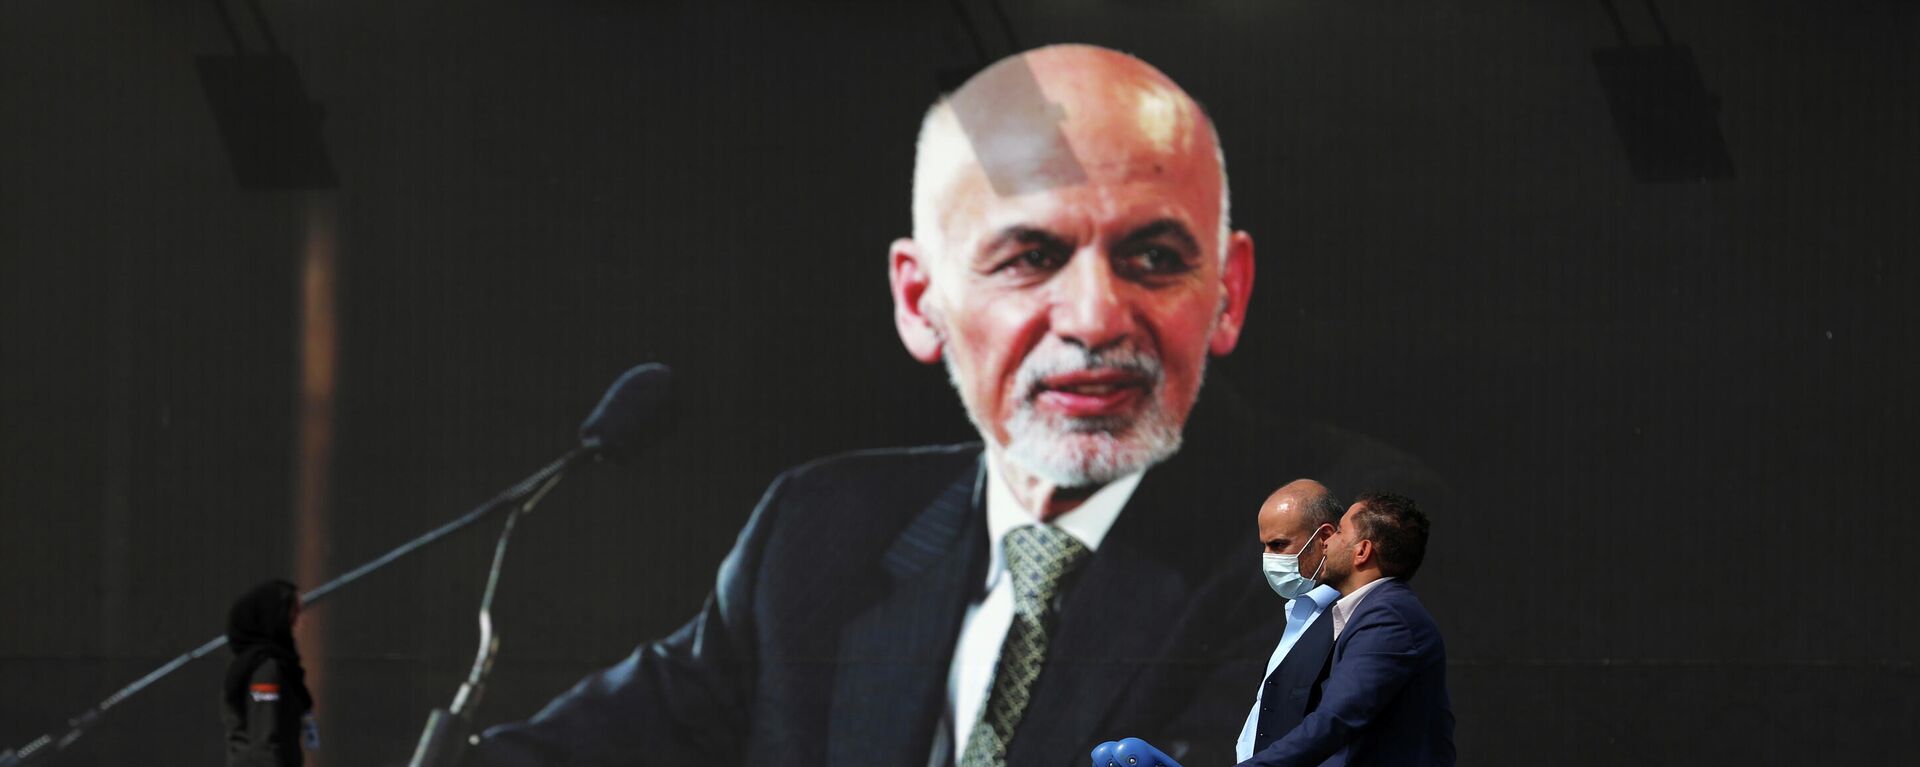 Passengers walk to the departures terminal of Hamid Karzai International Airport in Kabul, Afghanistan, on Saturday, Aug. 14, 2021, past a mural of President Ashraf Ghani, as the Taliban offensive encircled the capital.  - Sputnik International, 1920, 31.12.2021